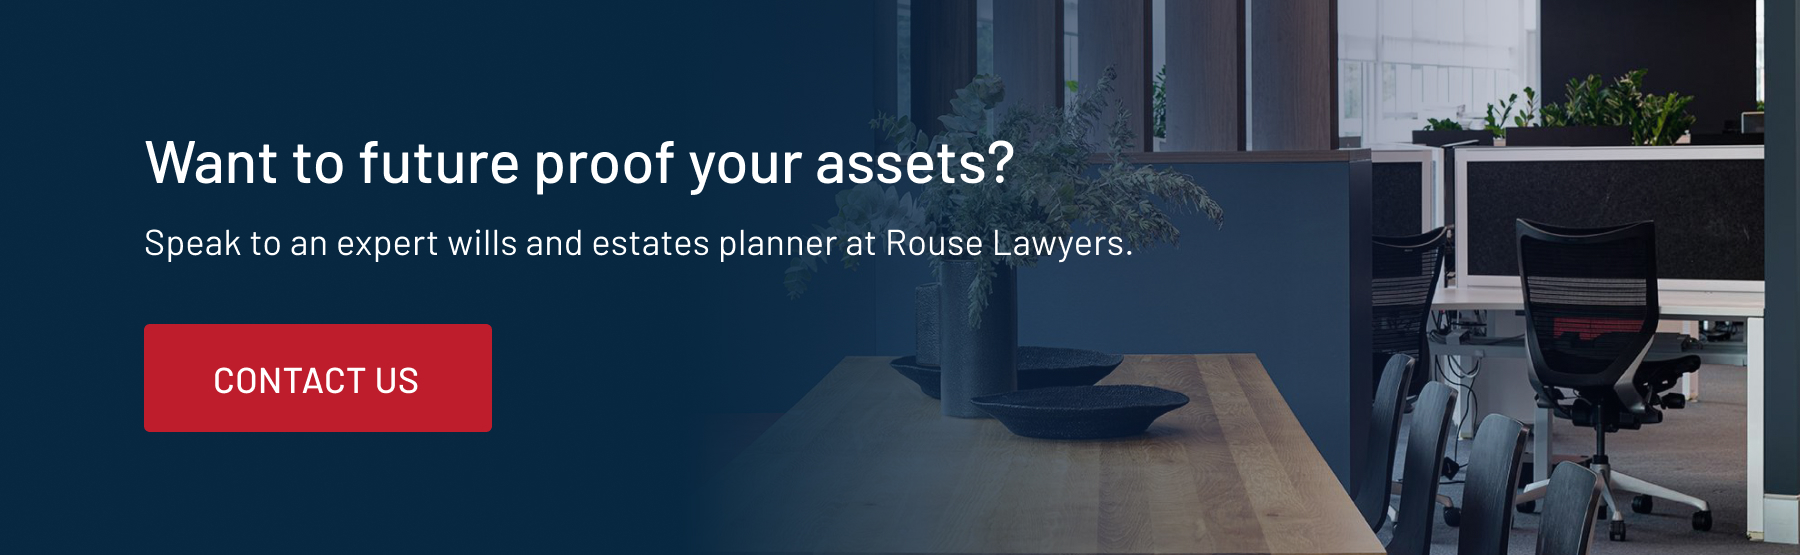 Want to future proof your assets? Speak to an expert wills and estates planner at Rouse Lawyers.